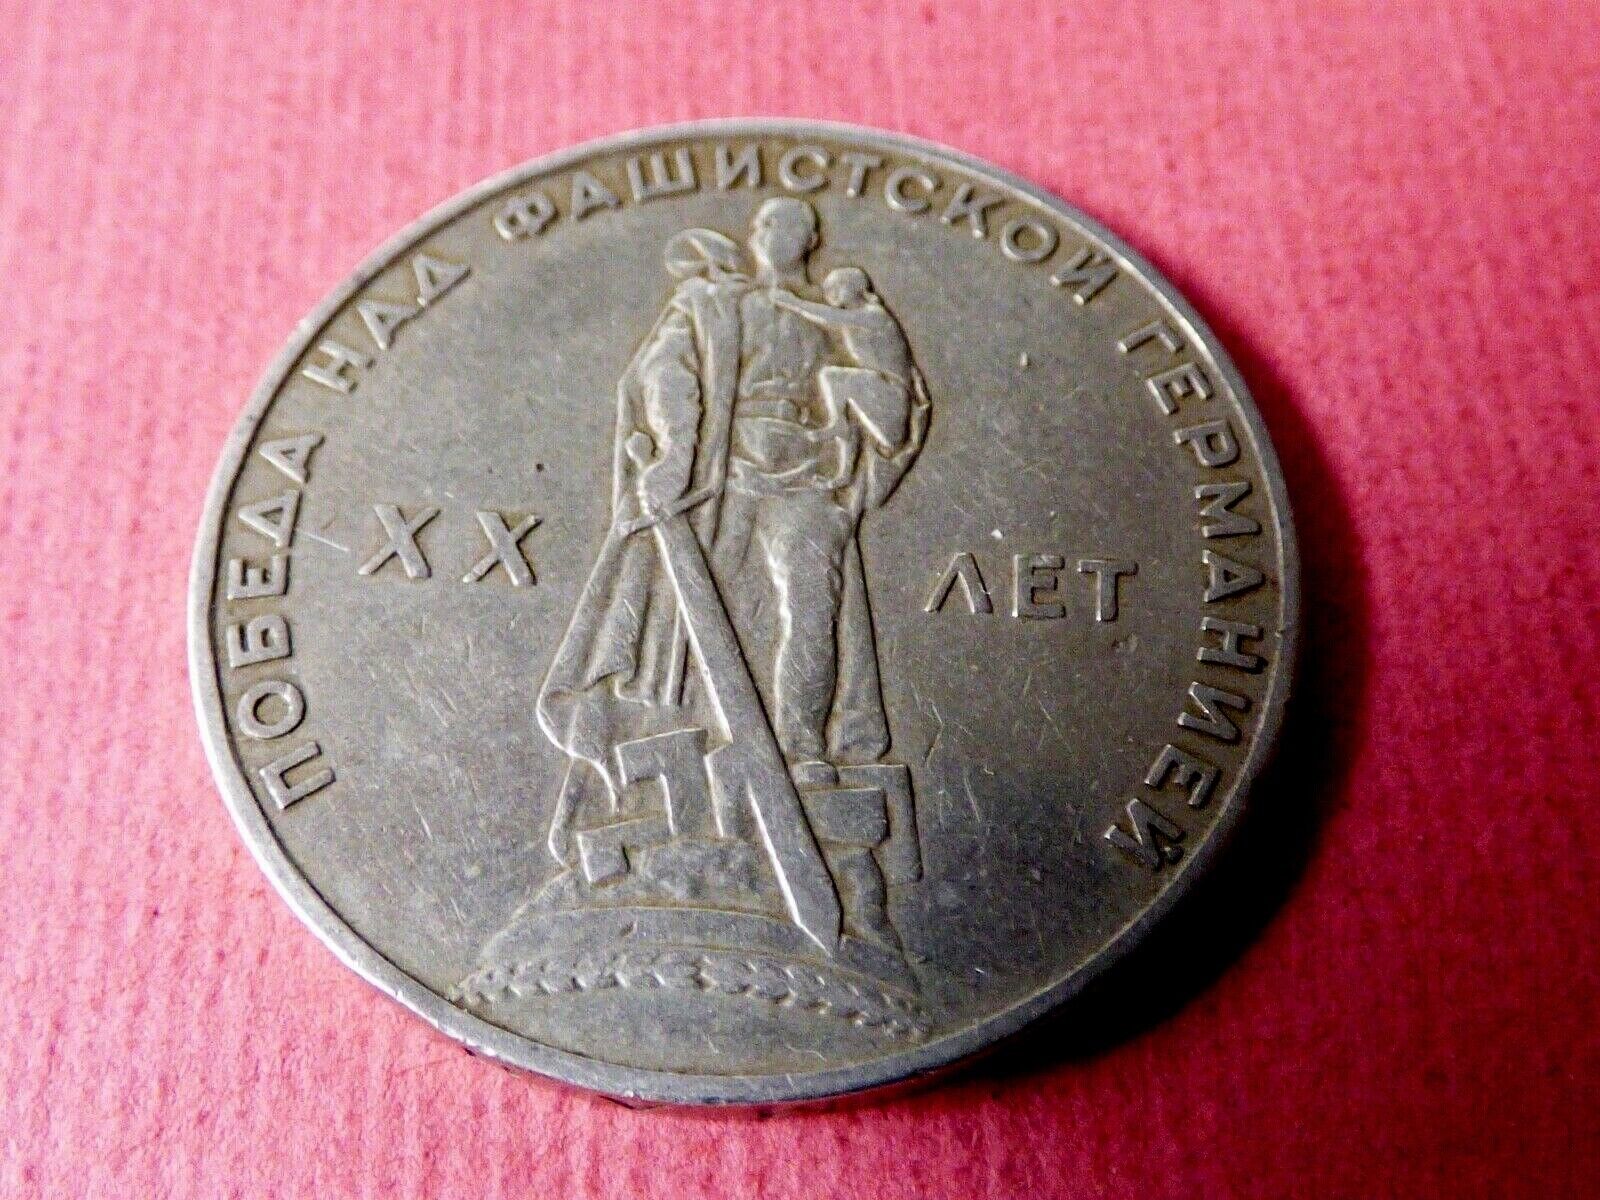 VTG USSR Russia 1 rouble coin 30 mm WWII Victory XX Anniversary May 9th 1965